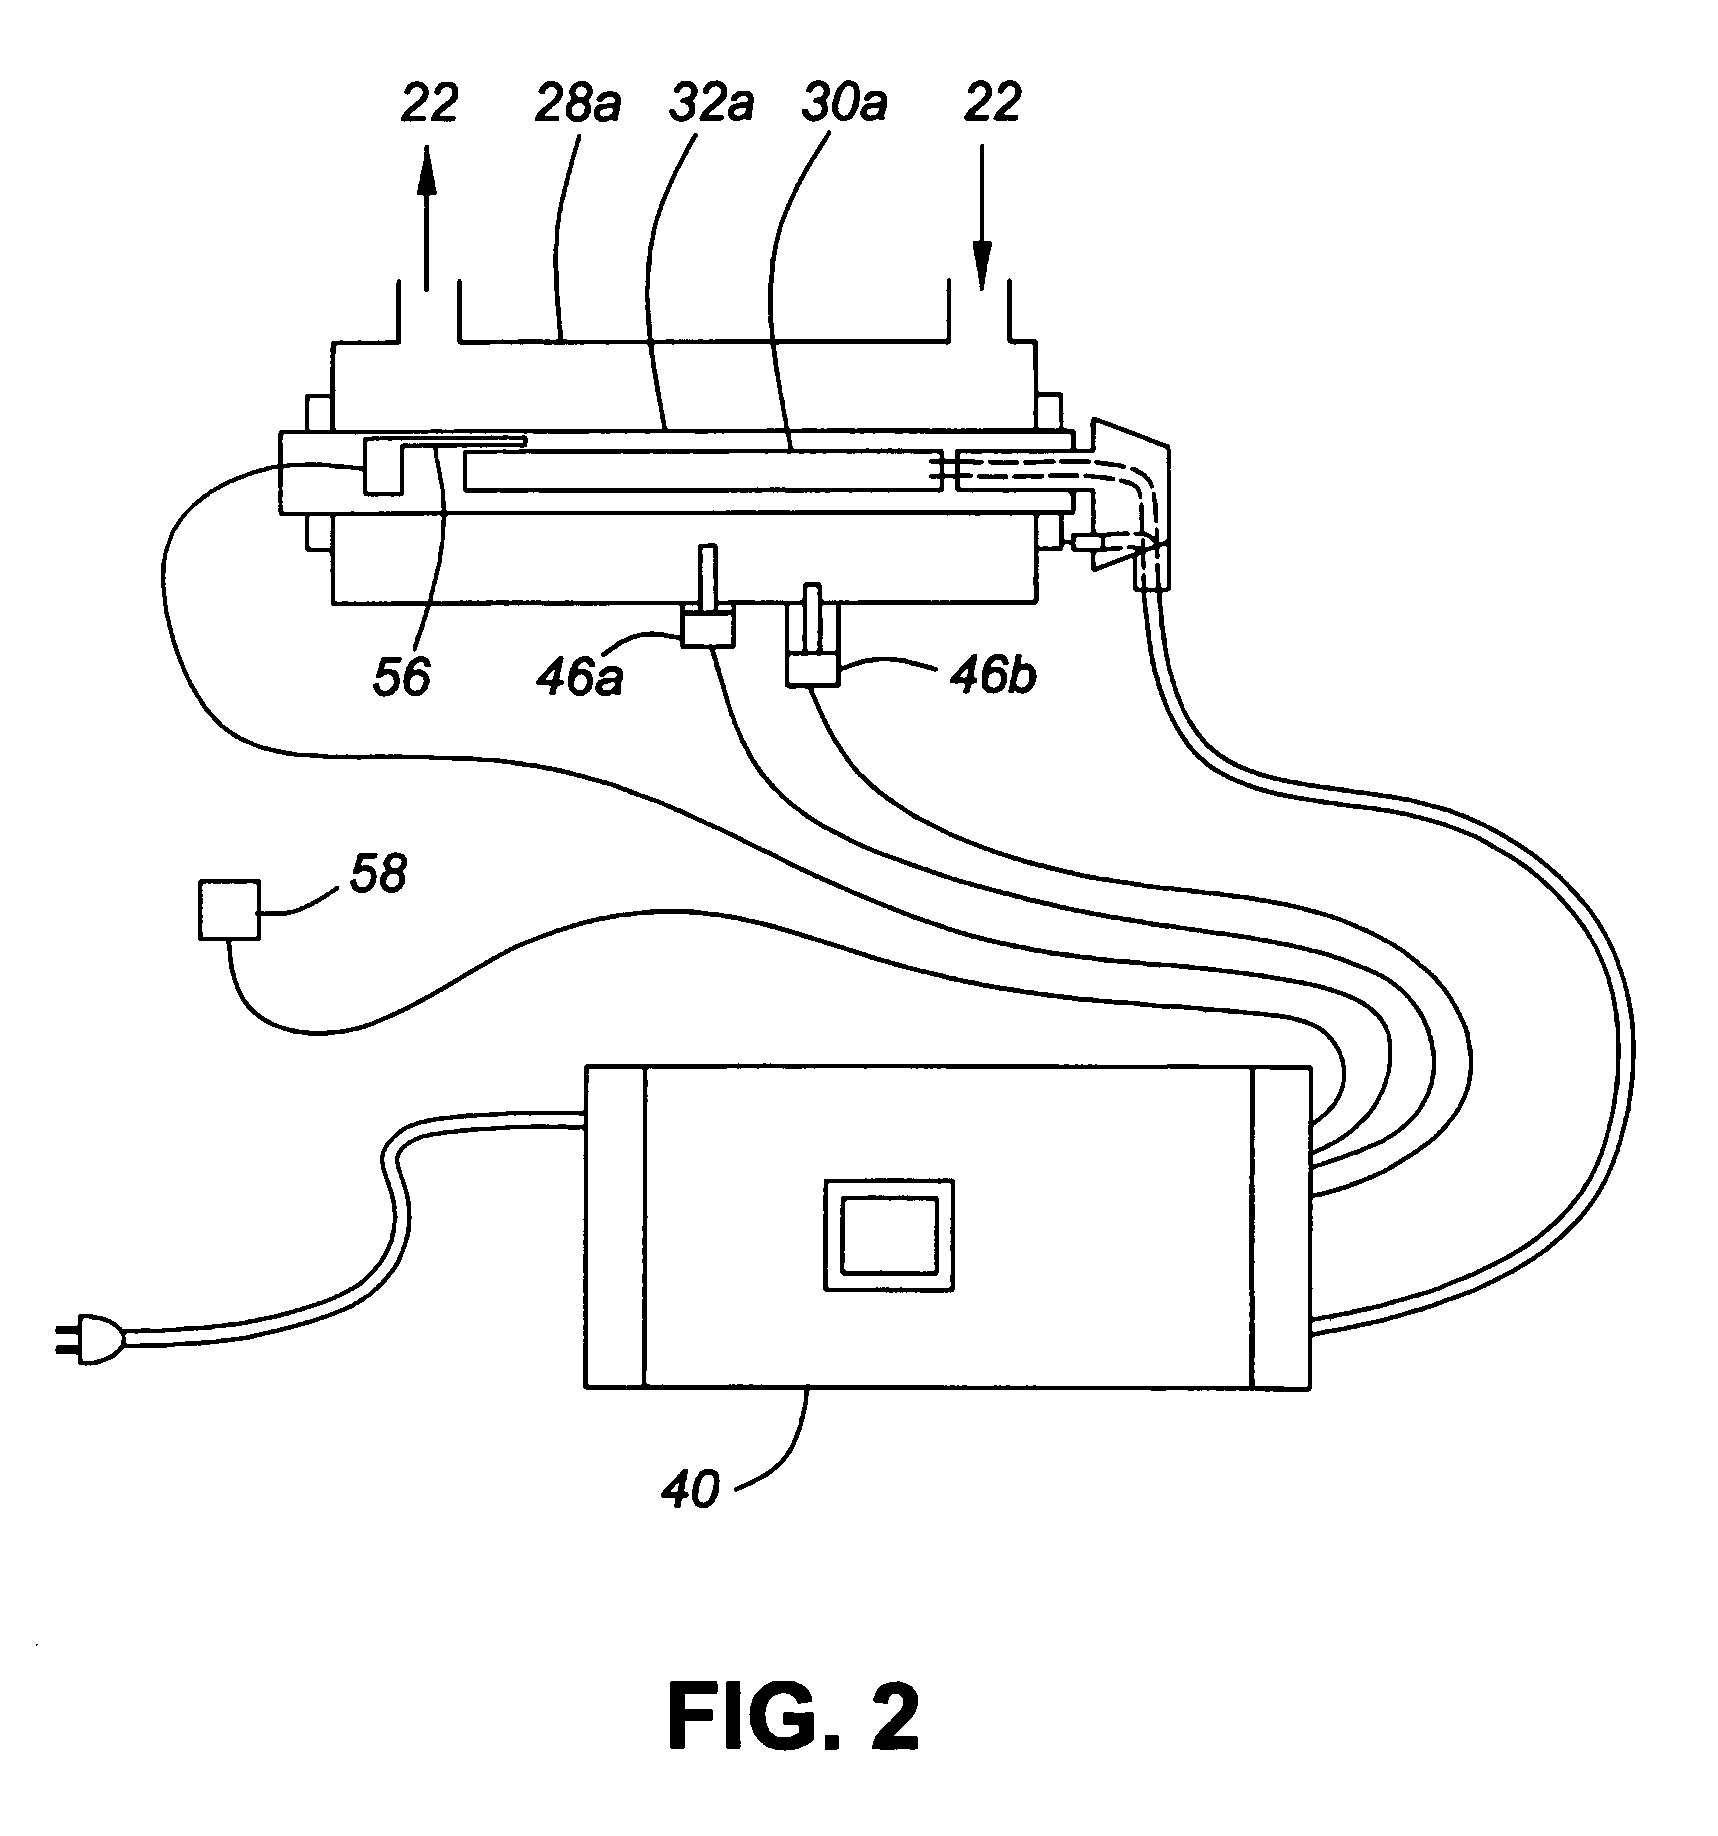 Fluid treatment system with UV sensor and intelligent driver